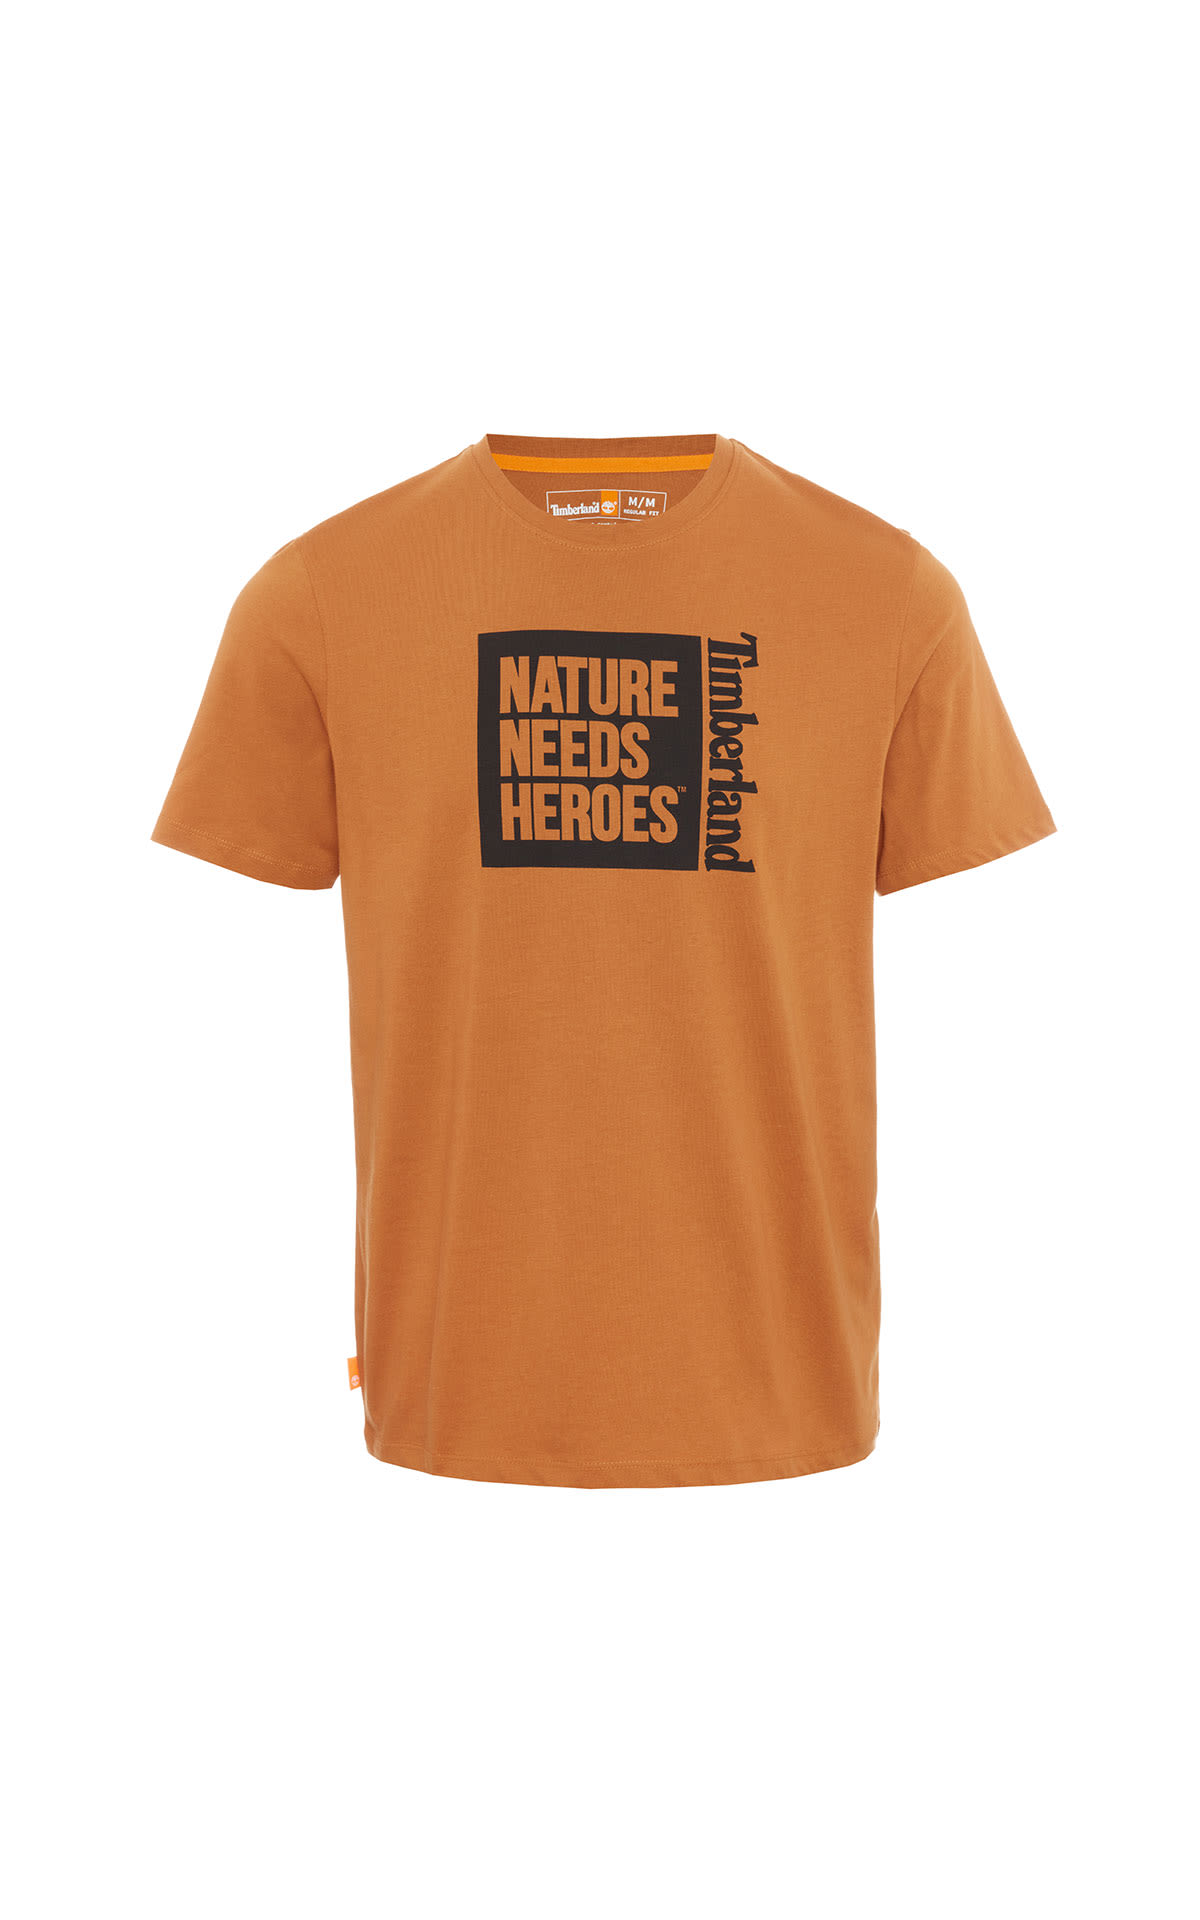 Timberland Nature needs heroes™  t-shirt from Bicester Village